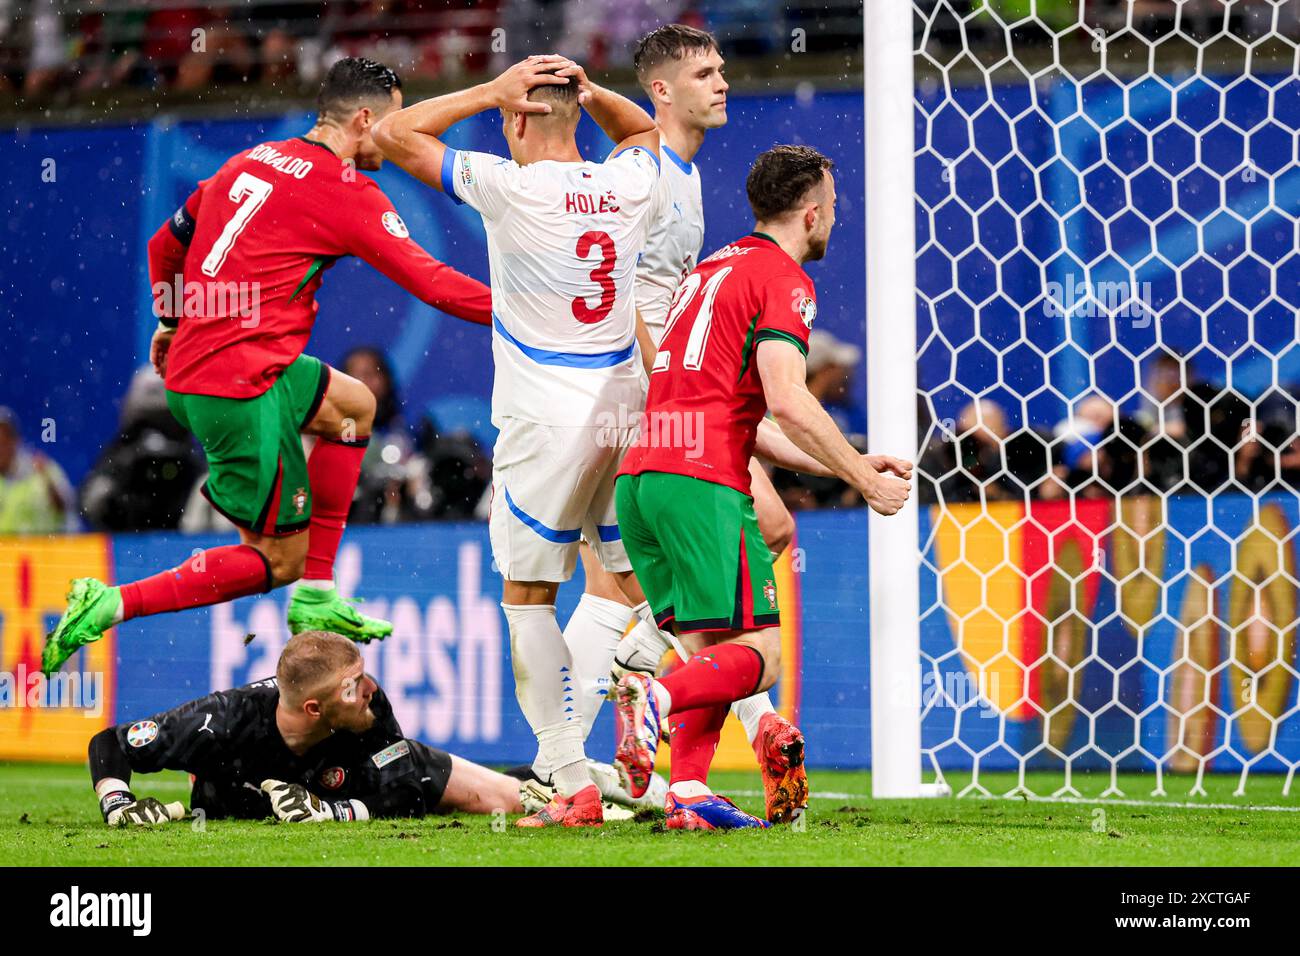 Leipzig, Germany. 18th June, 2024. LEIPZIG, GERMANY - JUNE 18: Tomas Holes of Czechia looks dejected over own goal of Robin Hranac of Czechia, Diogo Jota of Portugal and Cristiano Ronaldo of Portugal celebrating goal, Goalkeeper Jindrich Stanek of Czechia during the Group F - UEFA EURO 2024 match between Portugal and Czechia at Red Bull Arena on June 18, 2024 in Leipzig, Germany. (Photo by Peter Lous/BSR Agency) Credit: BSR Agency/Alamy Live News Stock Photo